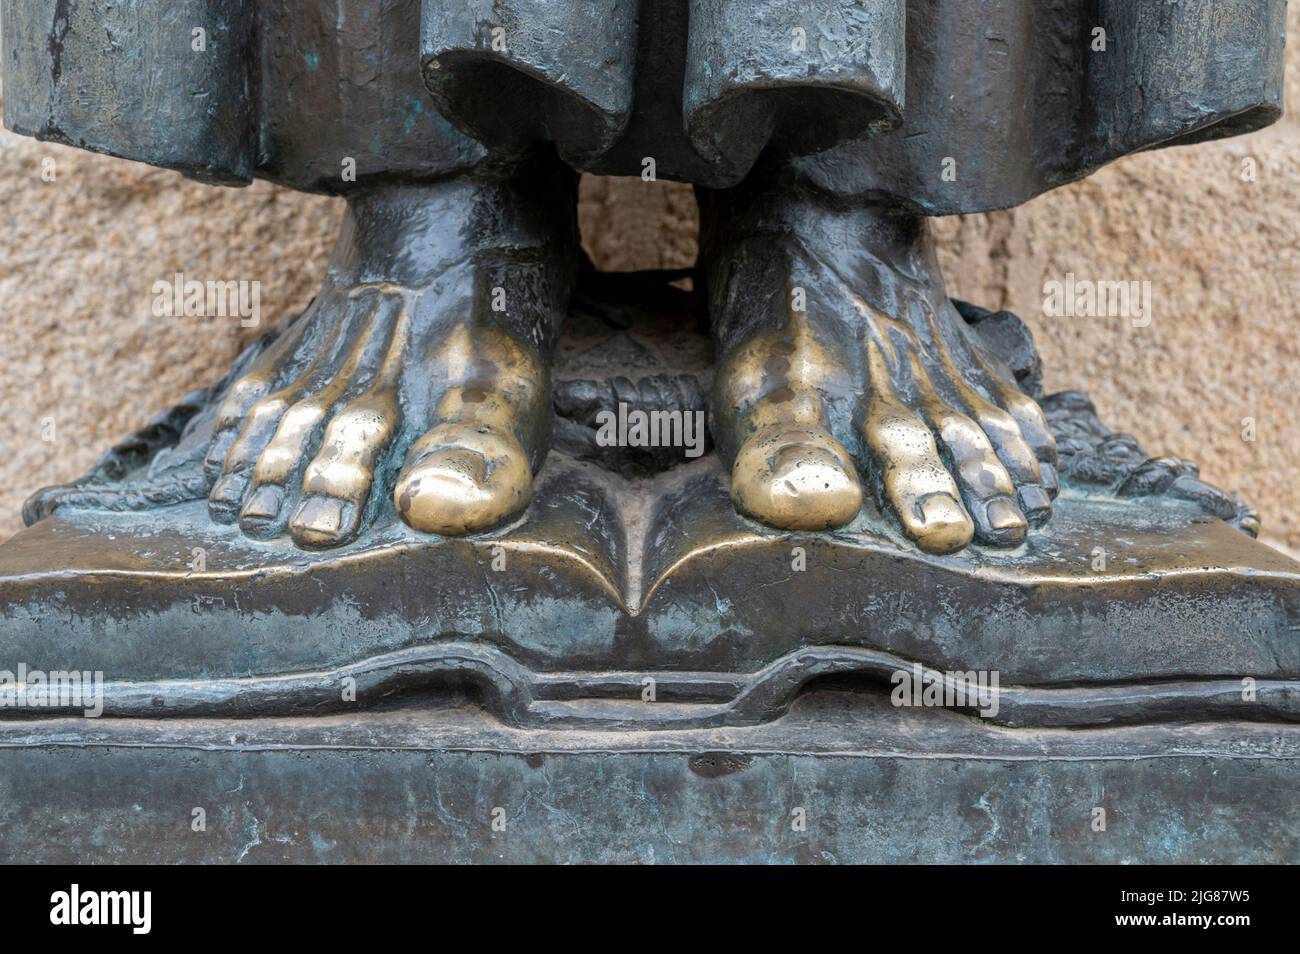 The feet of a bronze statue of San Pedro de Alcantara patron of the diocese of Caceres in Extramdura Spain with shiny edges where people have touched Stock Photo